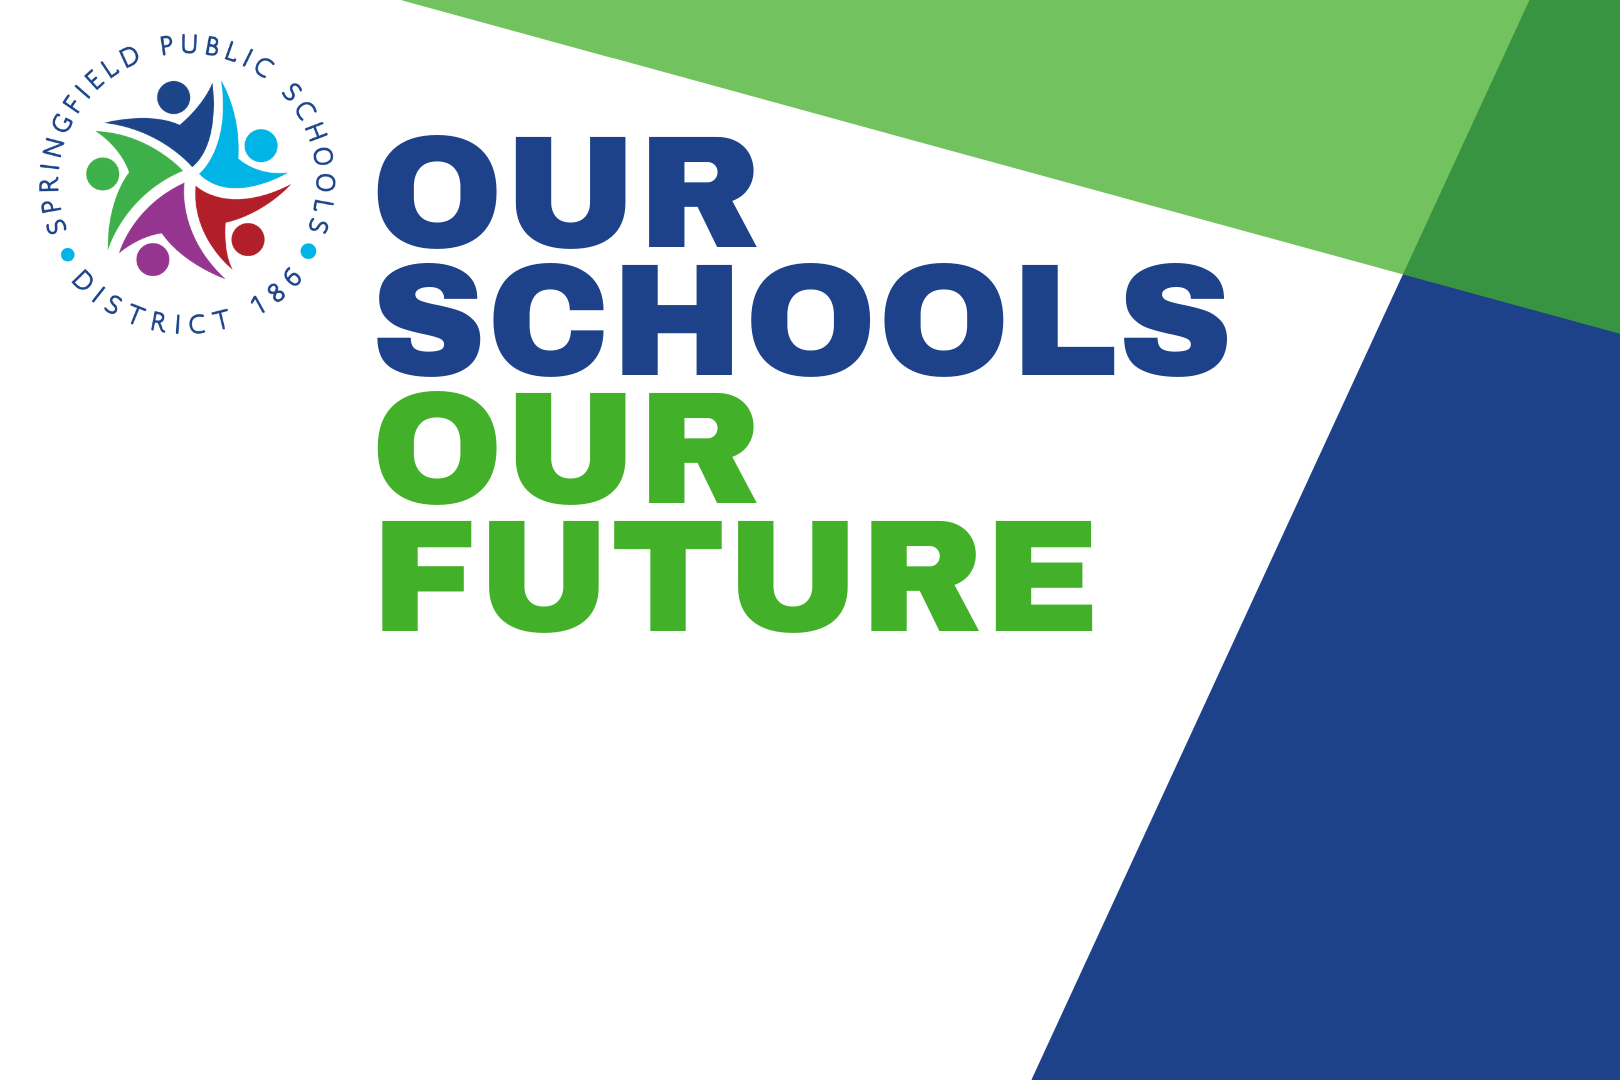 Our Schools Our Future